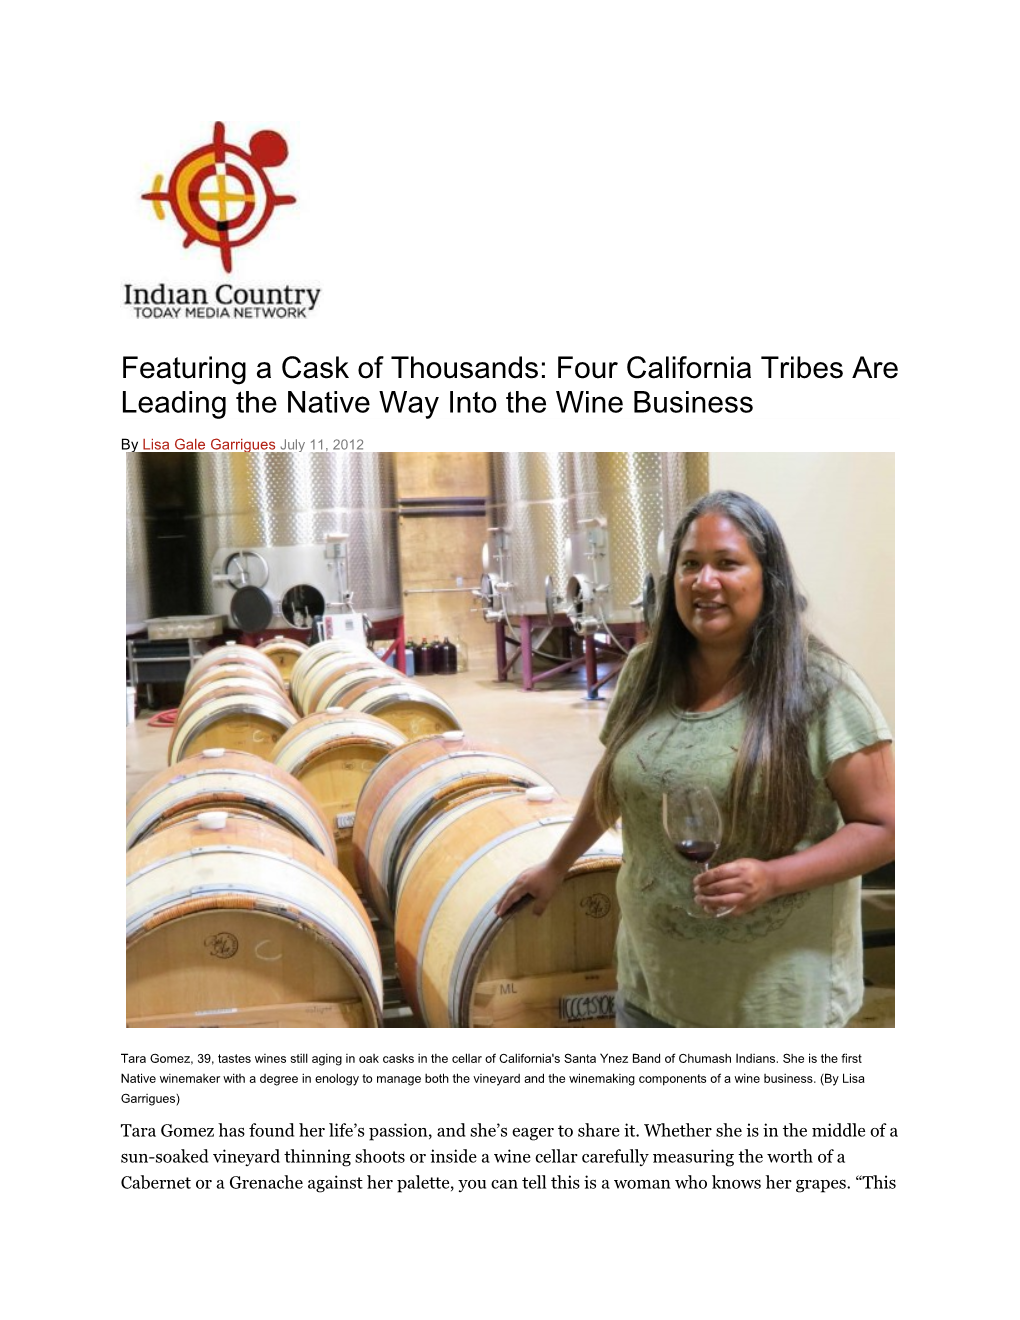 Featuring a Cask of Thousands: Four California Tribes Are Leading the Native Way Into The